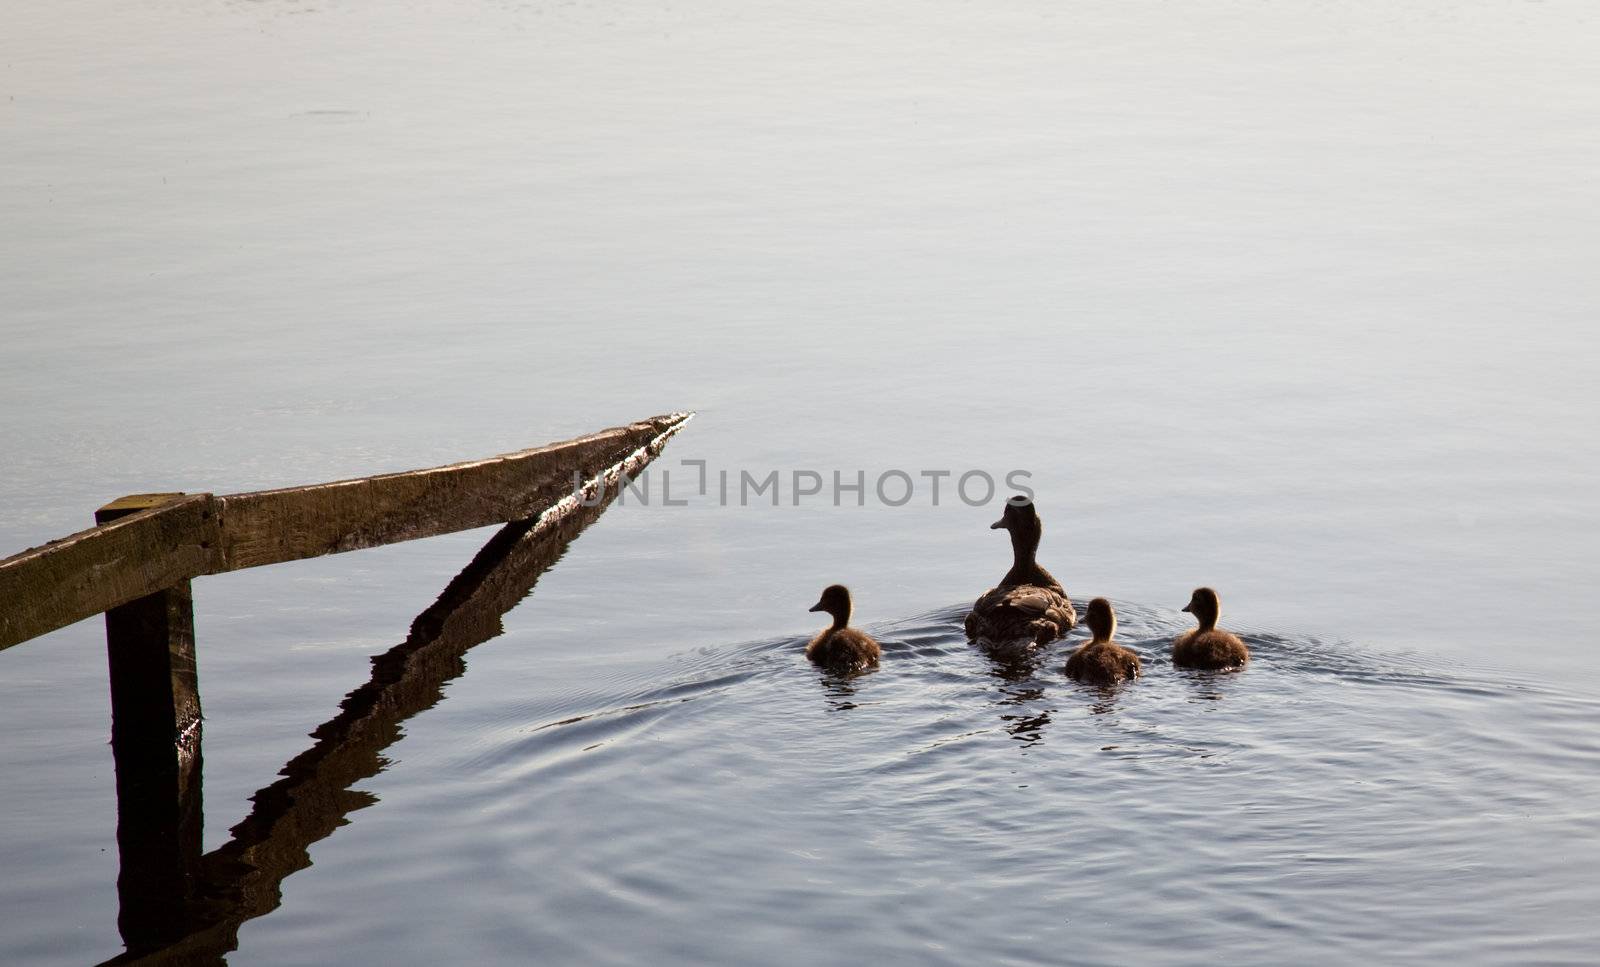 Submerged fence with duck and three ducklings on lake